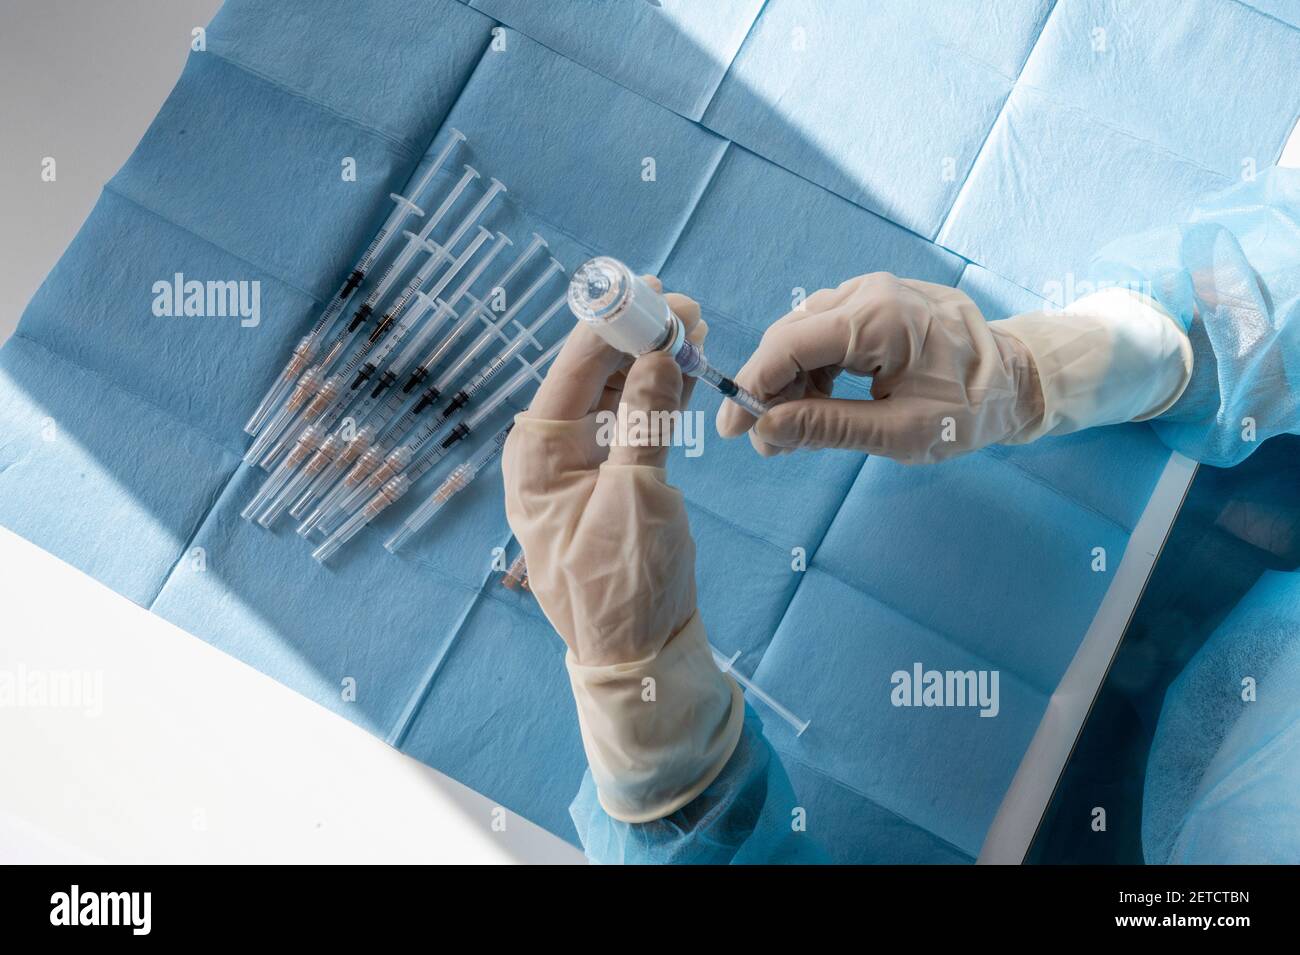 Medical worker prepare an injection of vaccine during a massive vaccination day at a healthcare centre.  Syringes in preparation and ready to use. Stock Photo